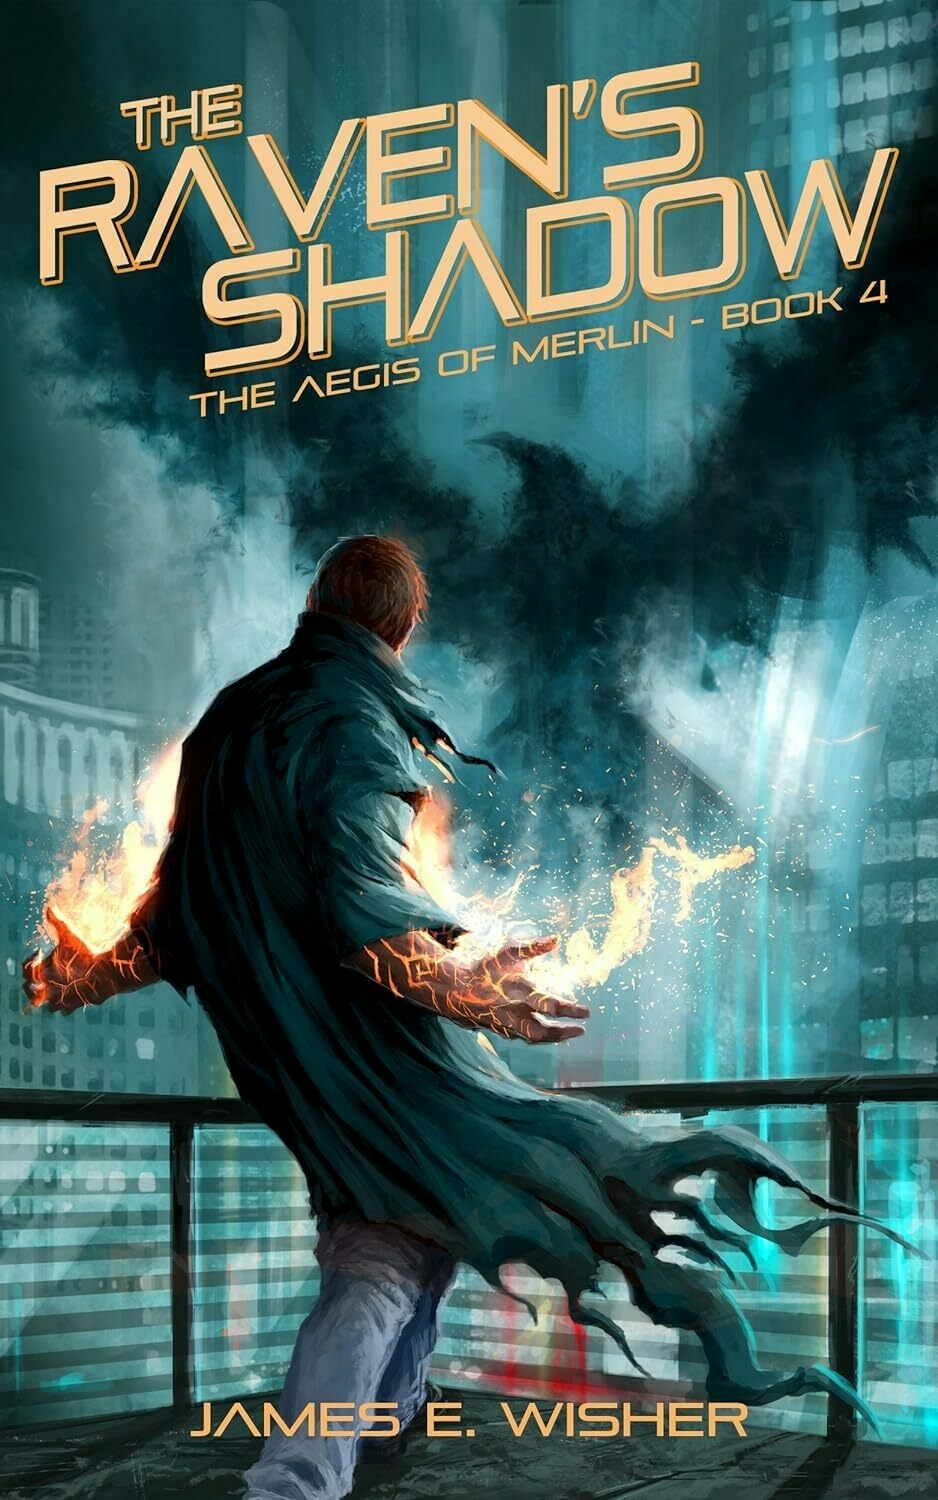 A person on a balcony conjures fire with their hands against a futuristic city backdrop. Text: 'THE RAVENS SHADOW THE AEGIS OF MERLIN - BOOK 4 JAMES E. WISHER'.